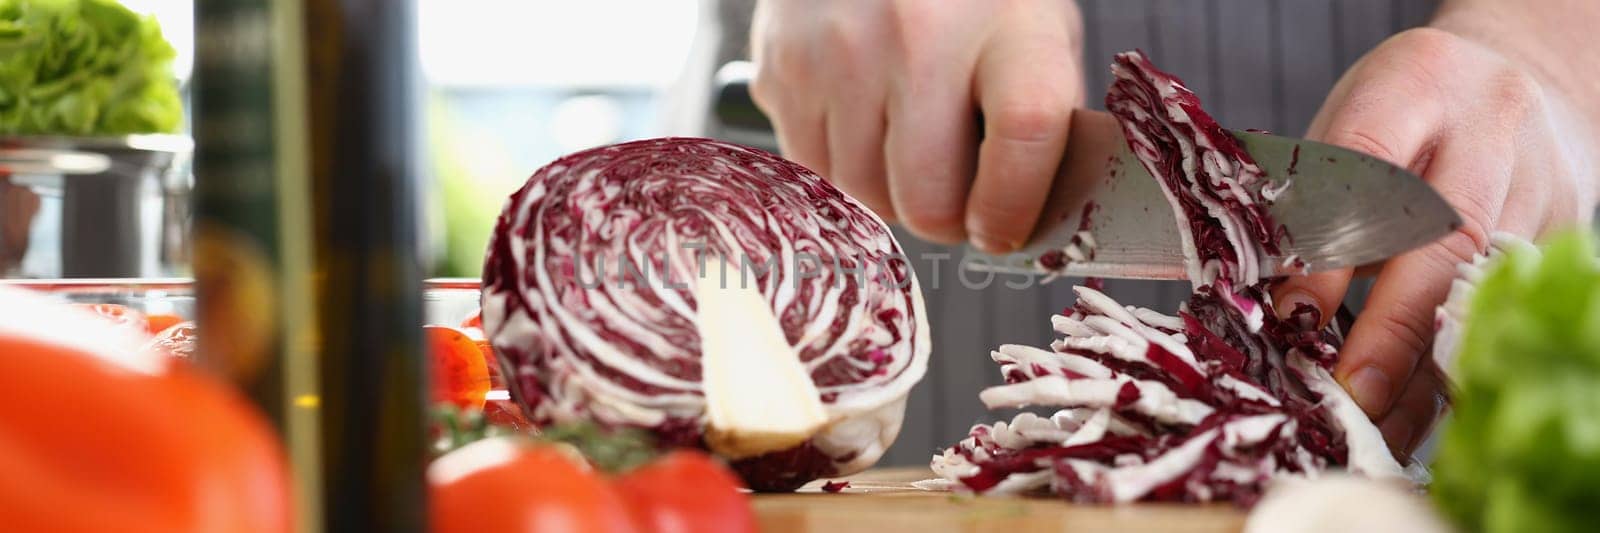 Closeup of a male cook hand using knife slicing fresh red cabbage on cutting board in kitchen at home. Cooking vegetable salad concept